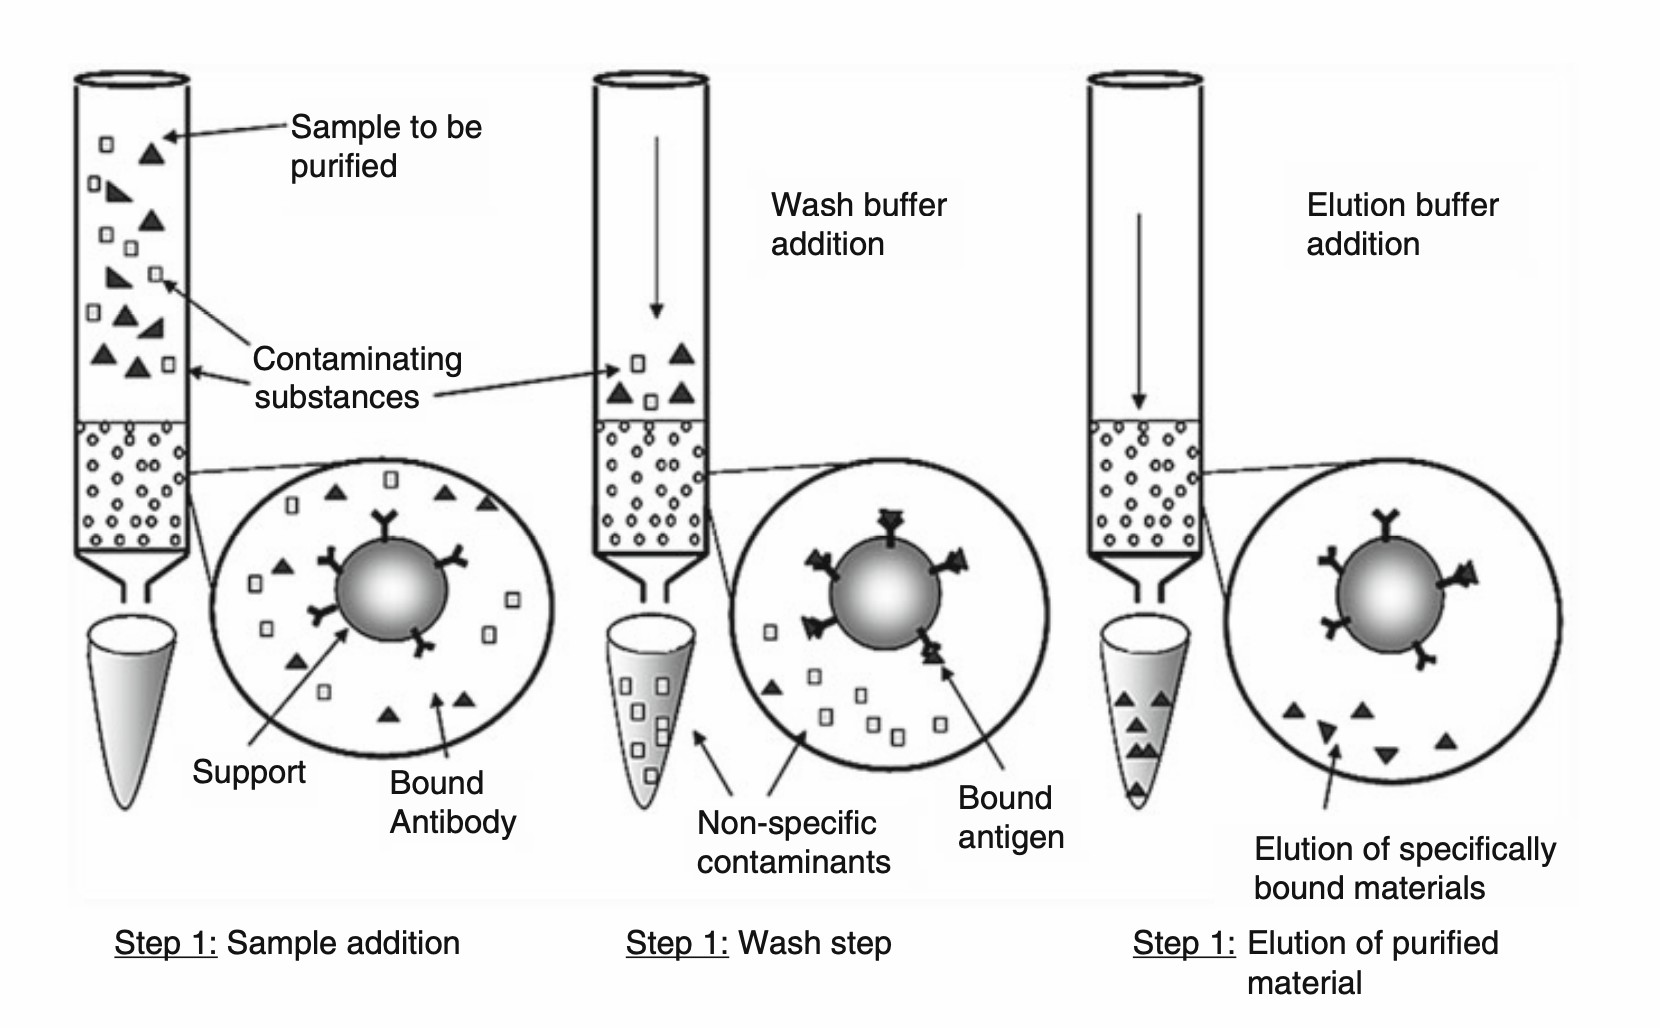 The principal and working steps of immunoaffinity chromatography for antigen purification. (Fitzgerald, et al., 2017)